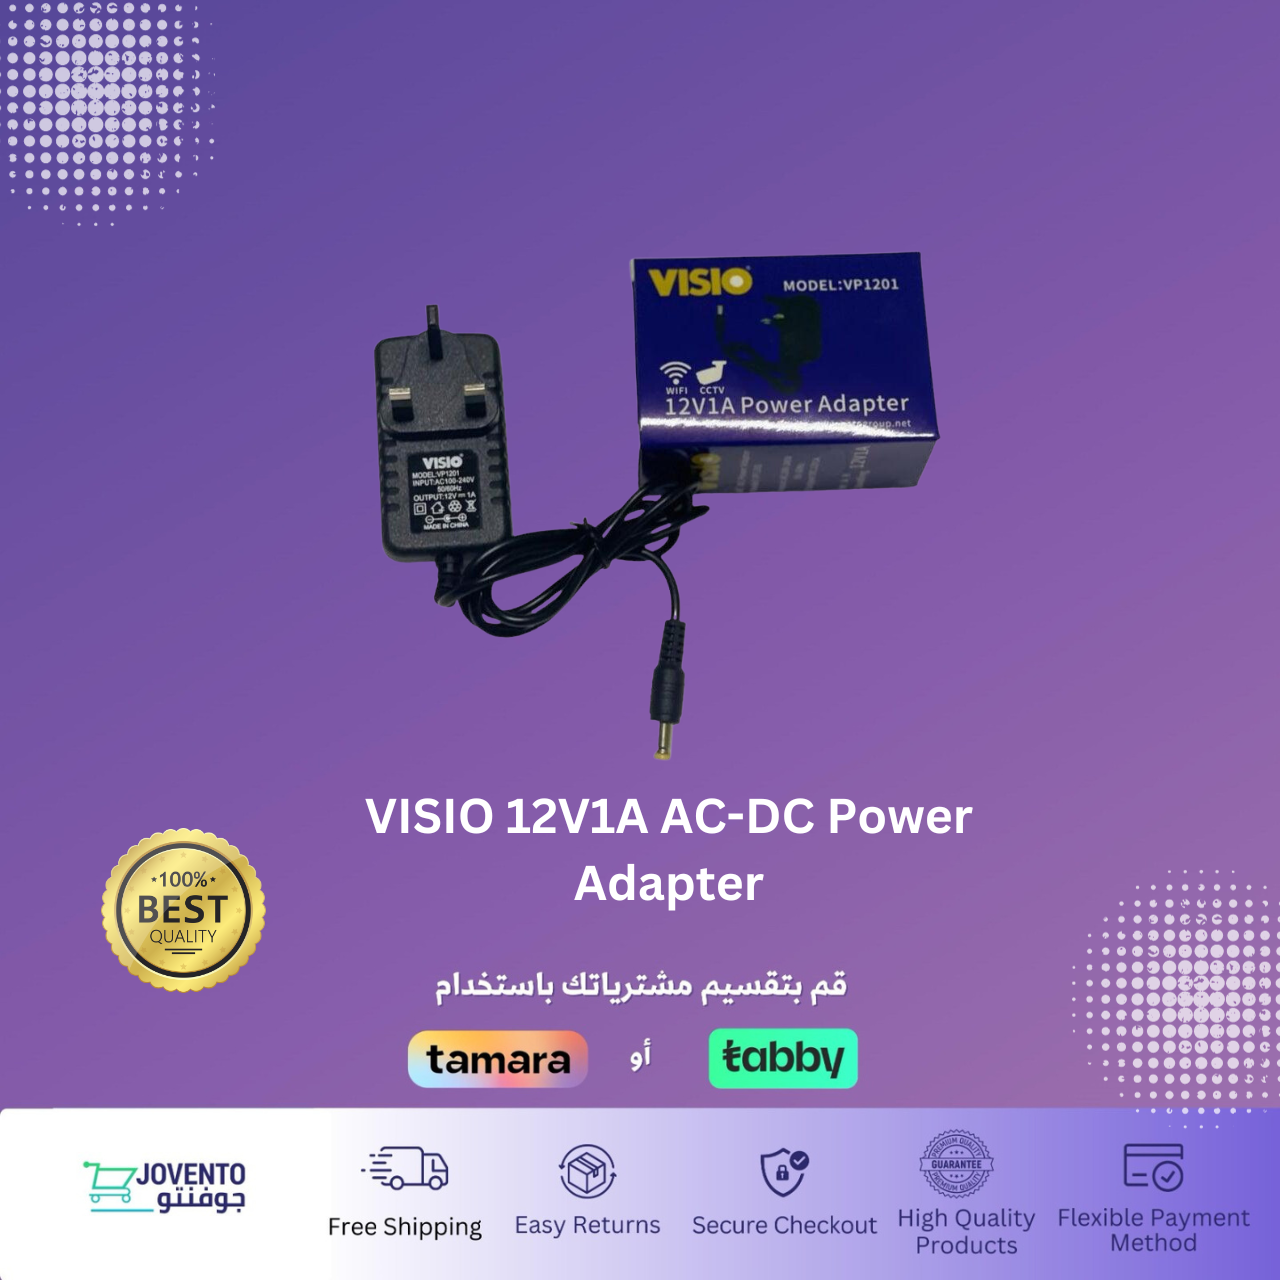 VISIO 12V1A AC-DC Power Adapter